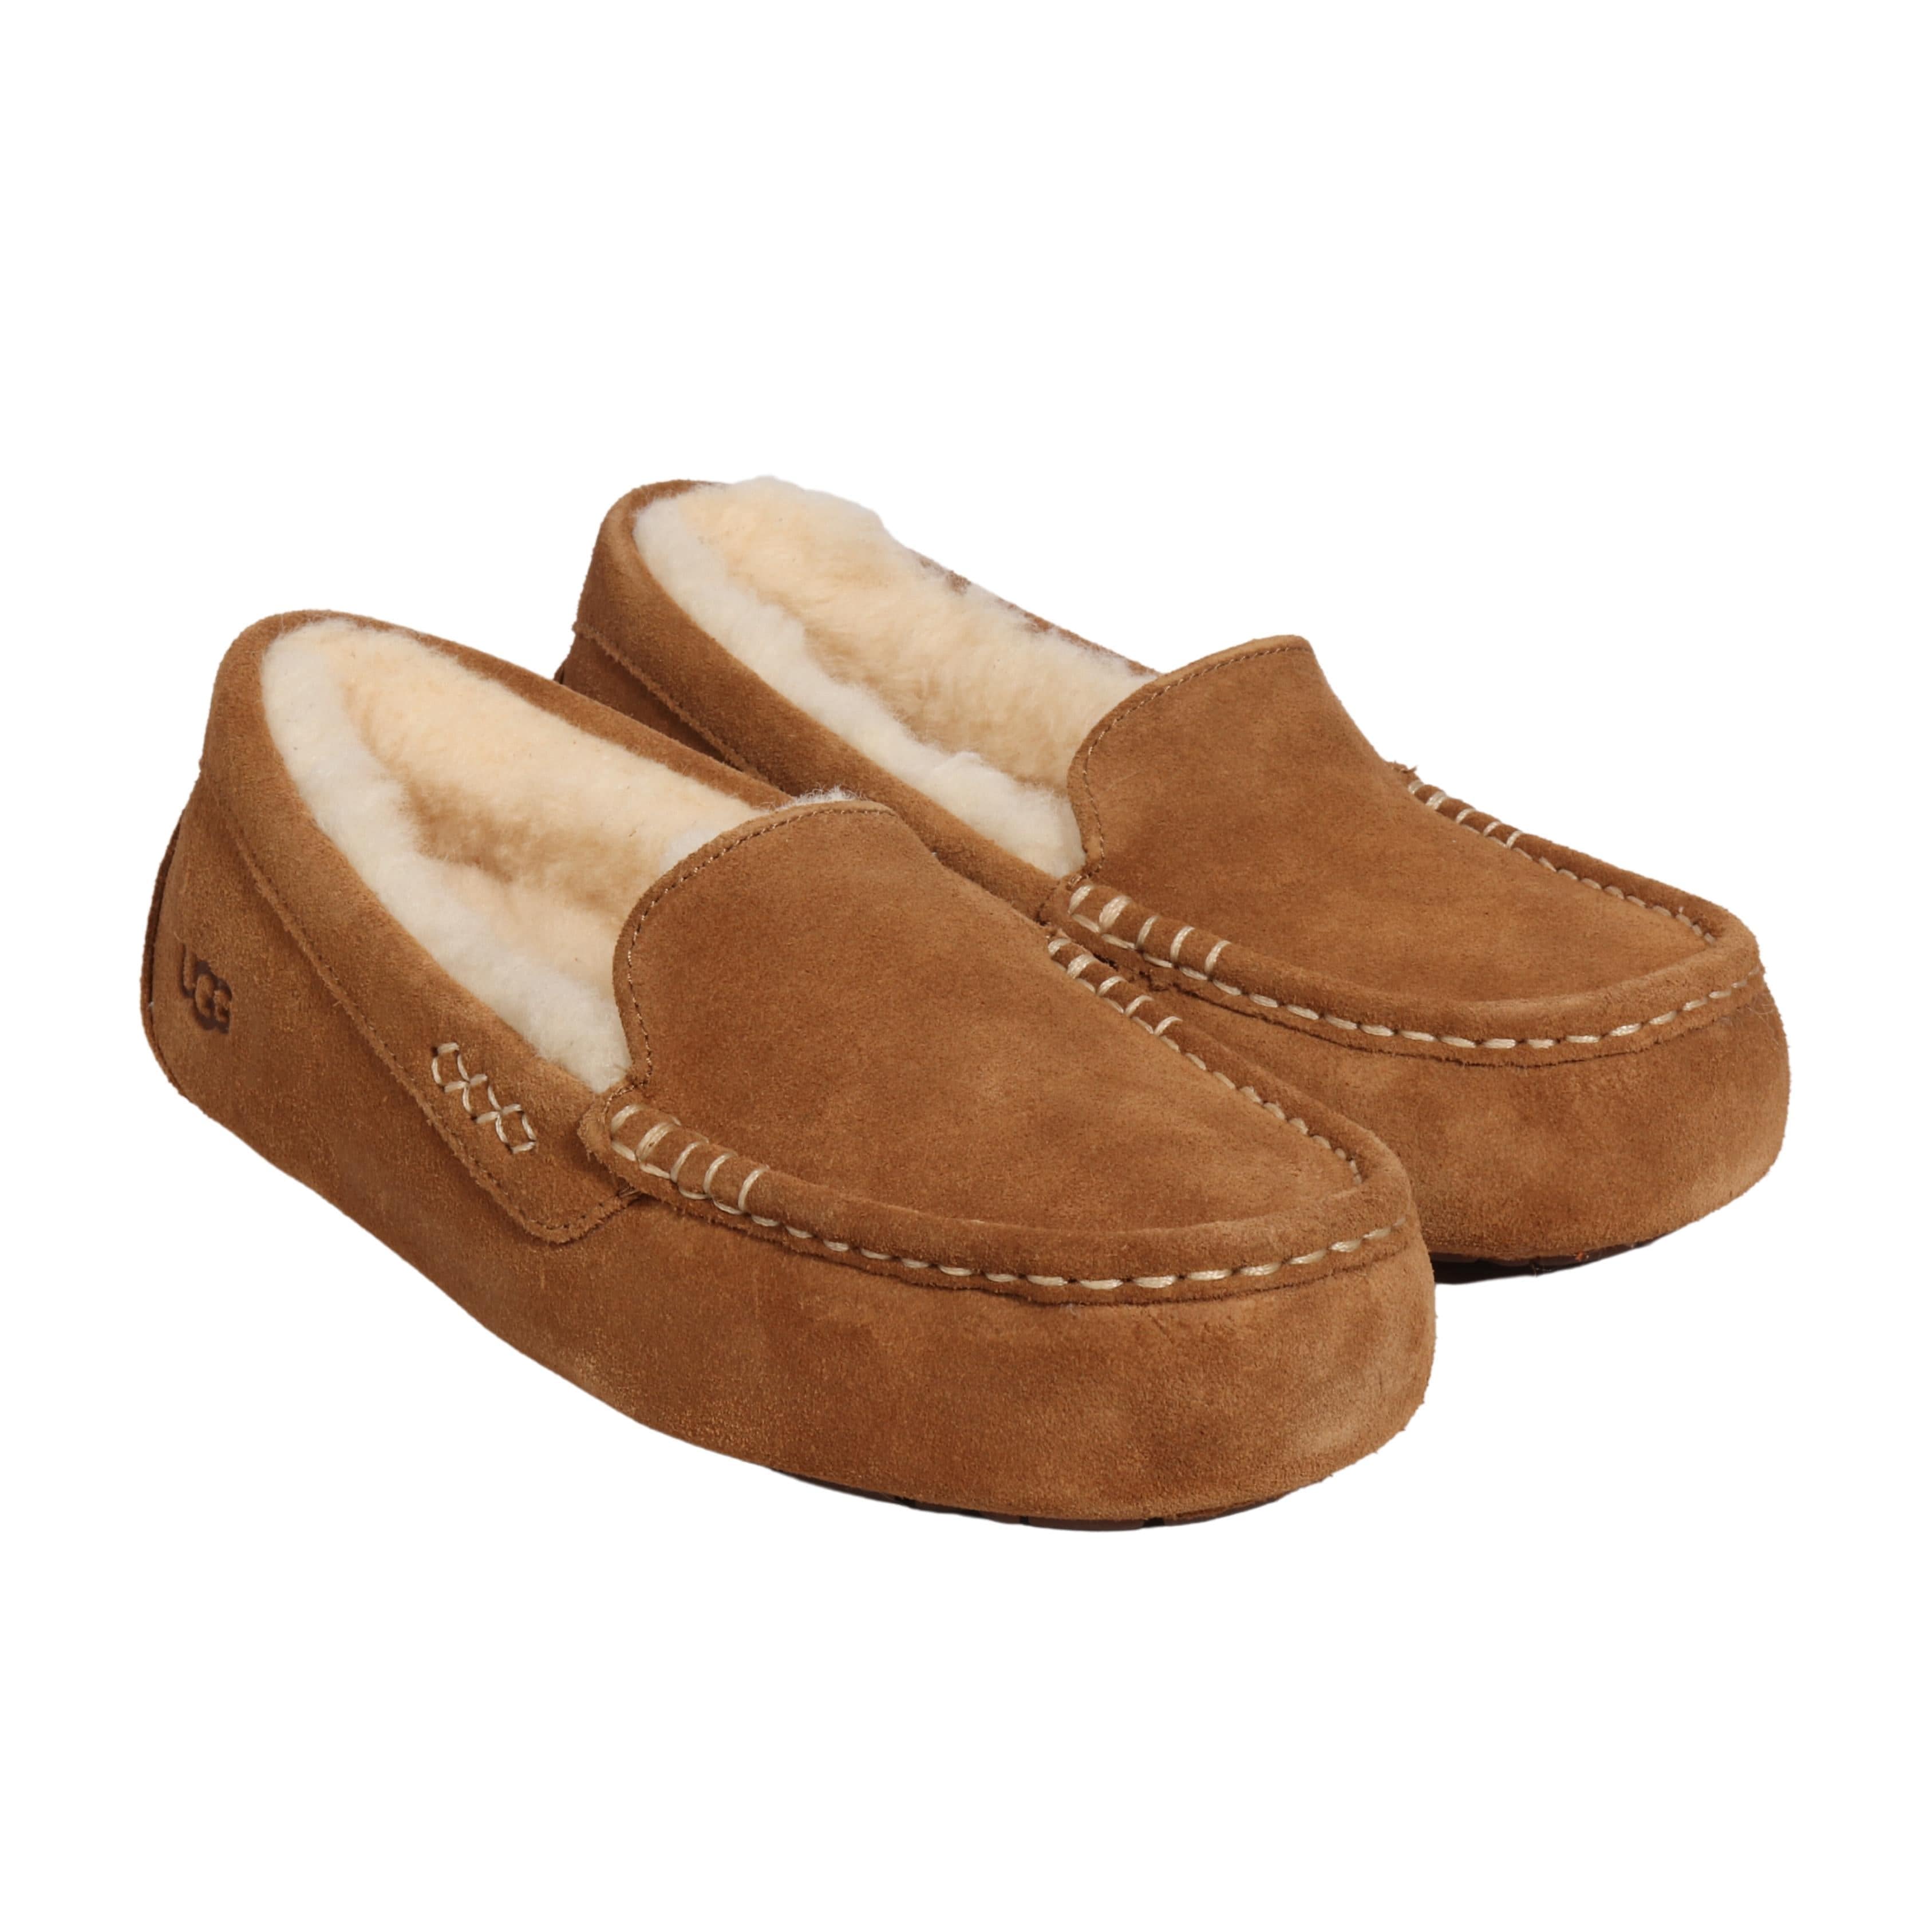 Women's UGG Ansley slippers | Uggs, Slippers, Slippers shop